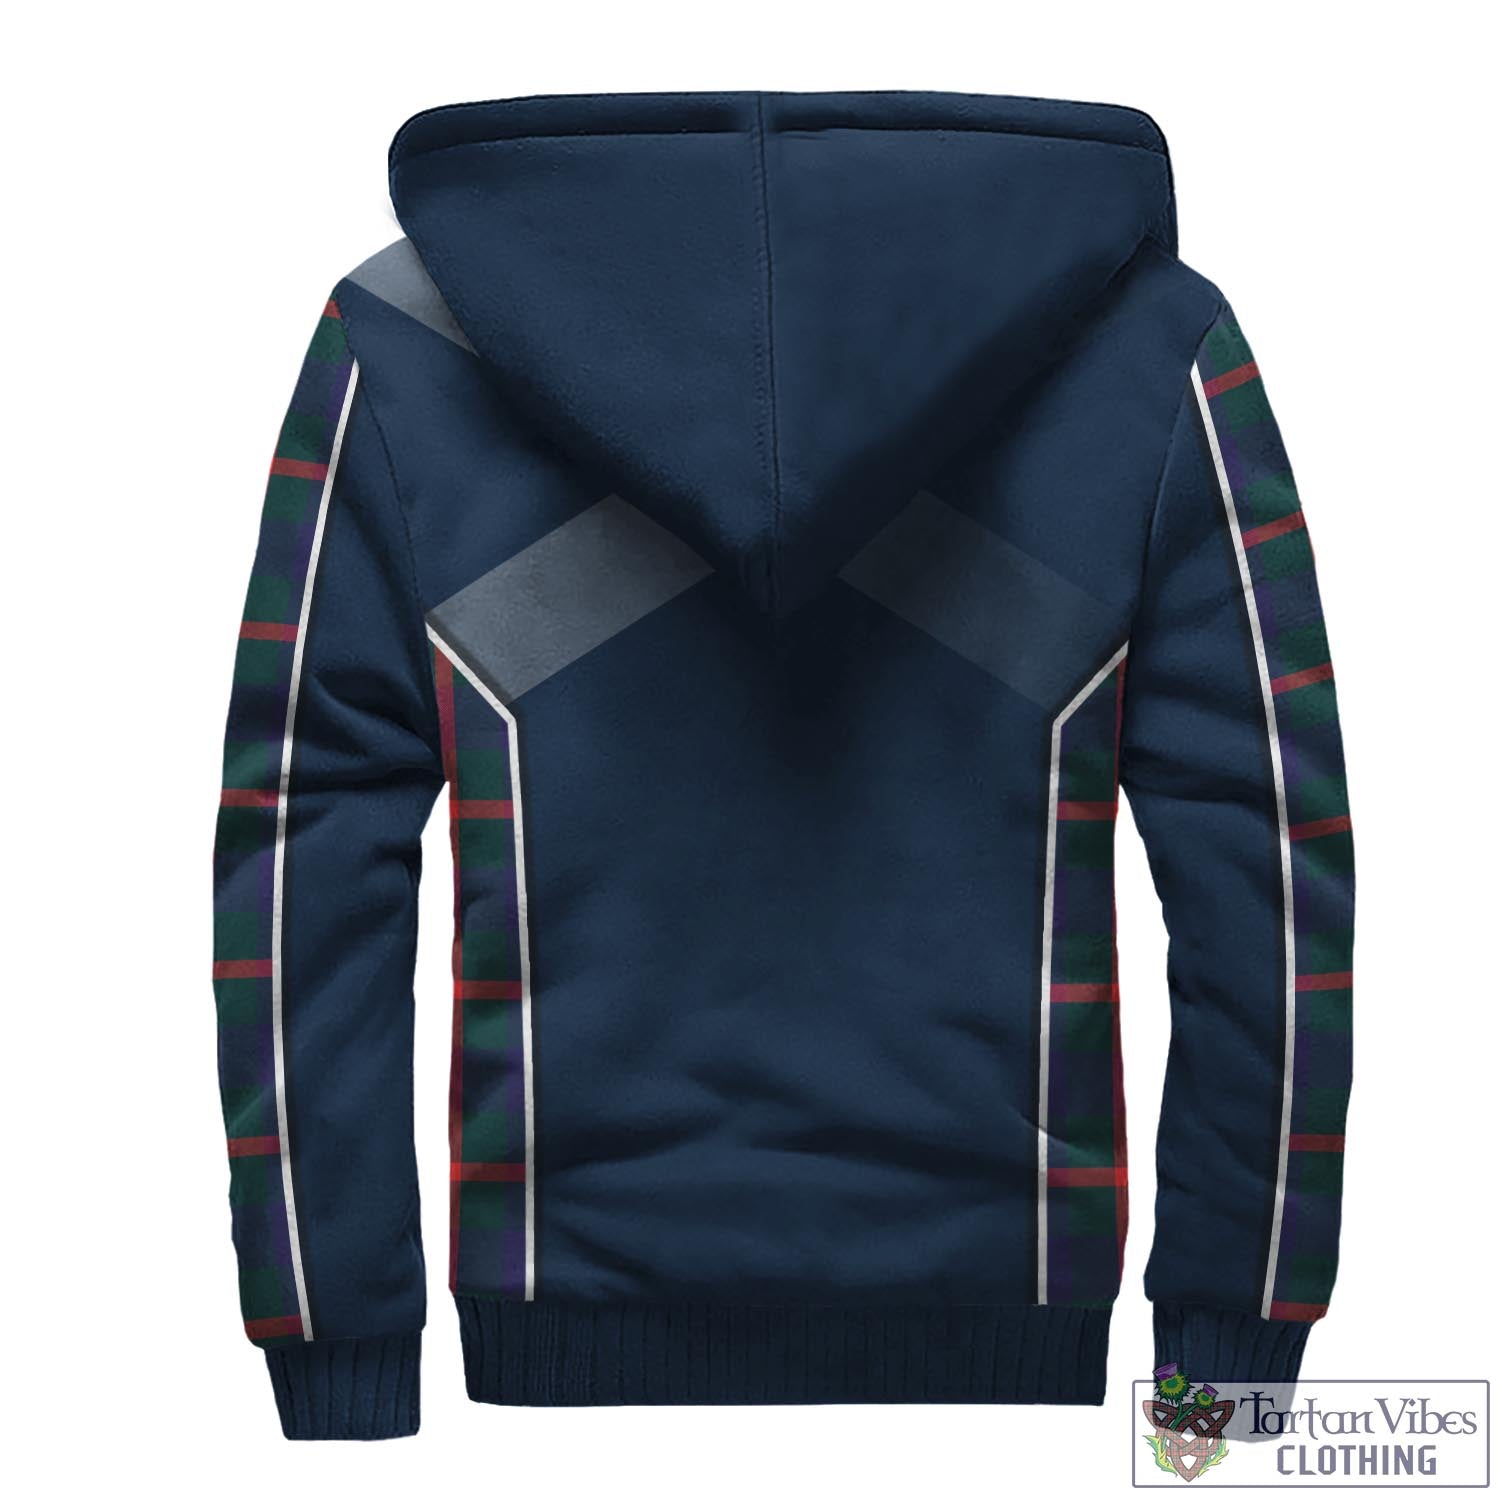 Tartan Vibes Clothing Agnew Modern Tartan Sherpa Hoodie with Family Crest and Scottish Thistle Vibes Sport Style